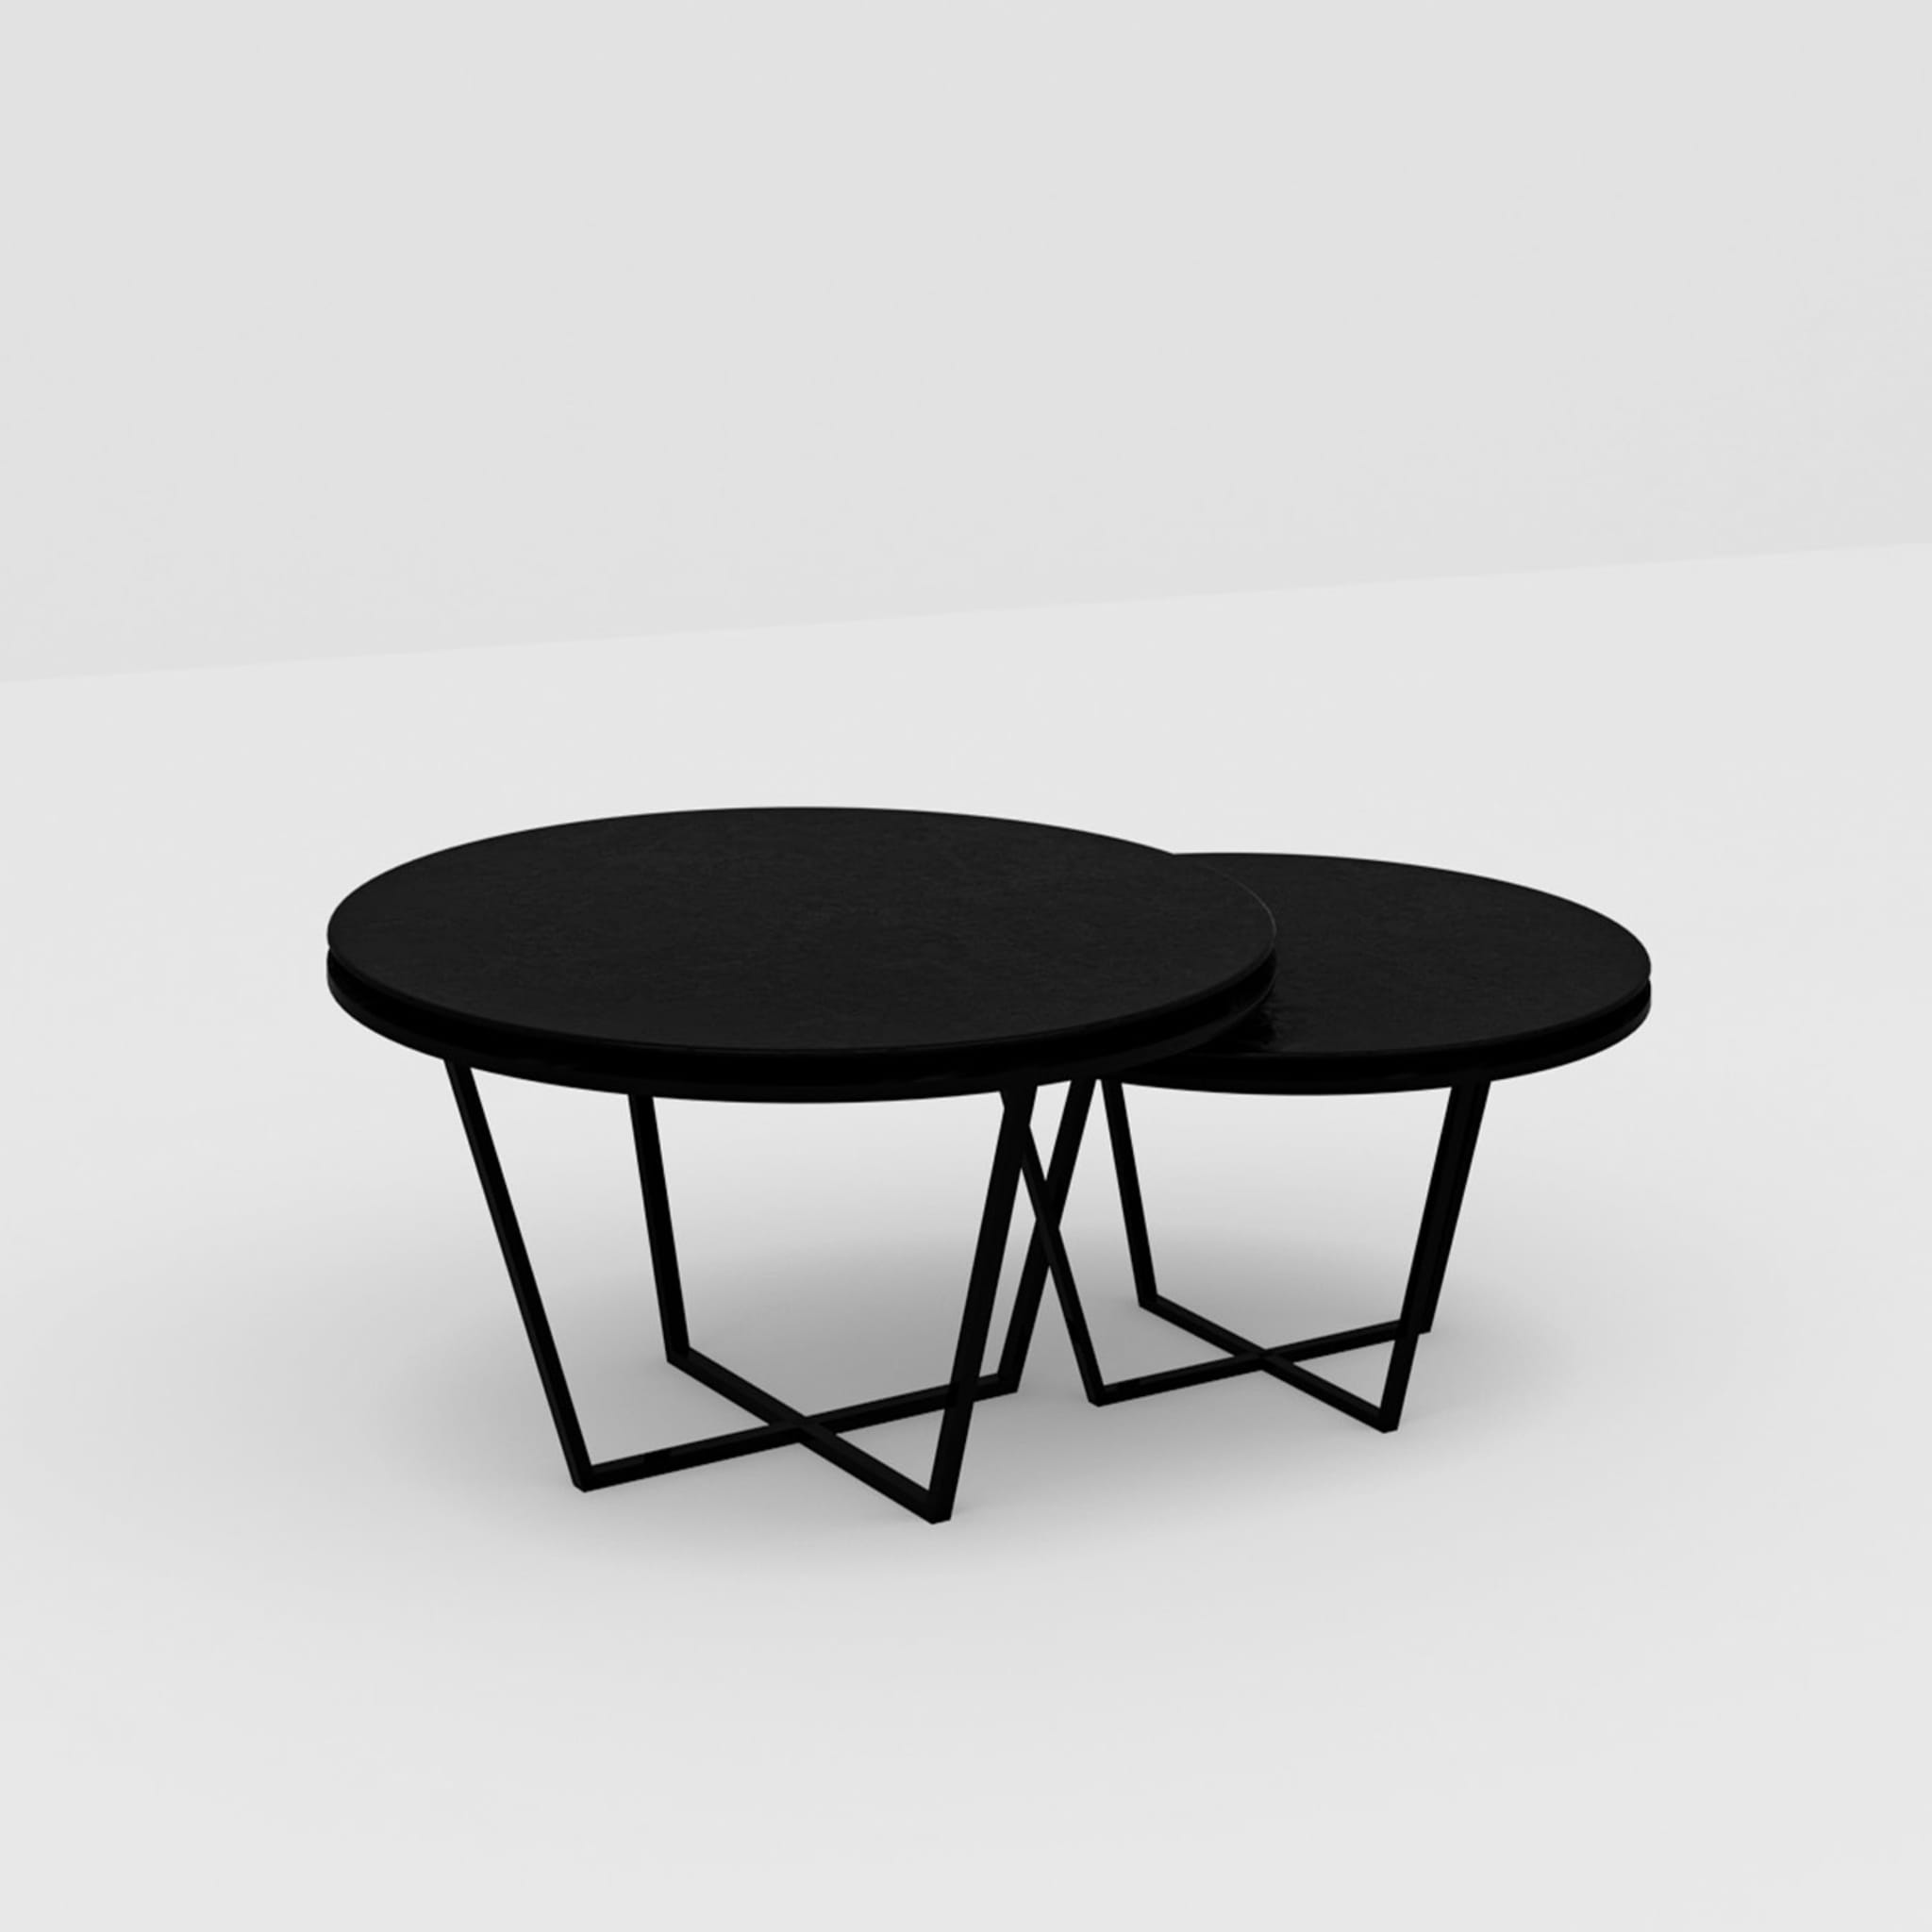 Set of 2 Different-Height Round Black Coffee Tables - Alternative view 1